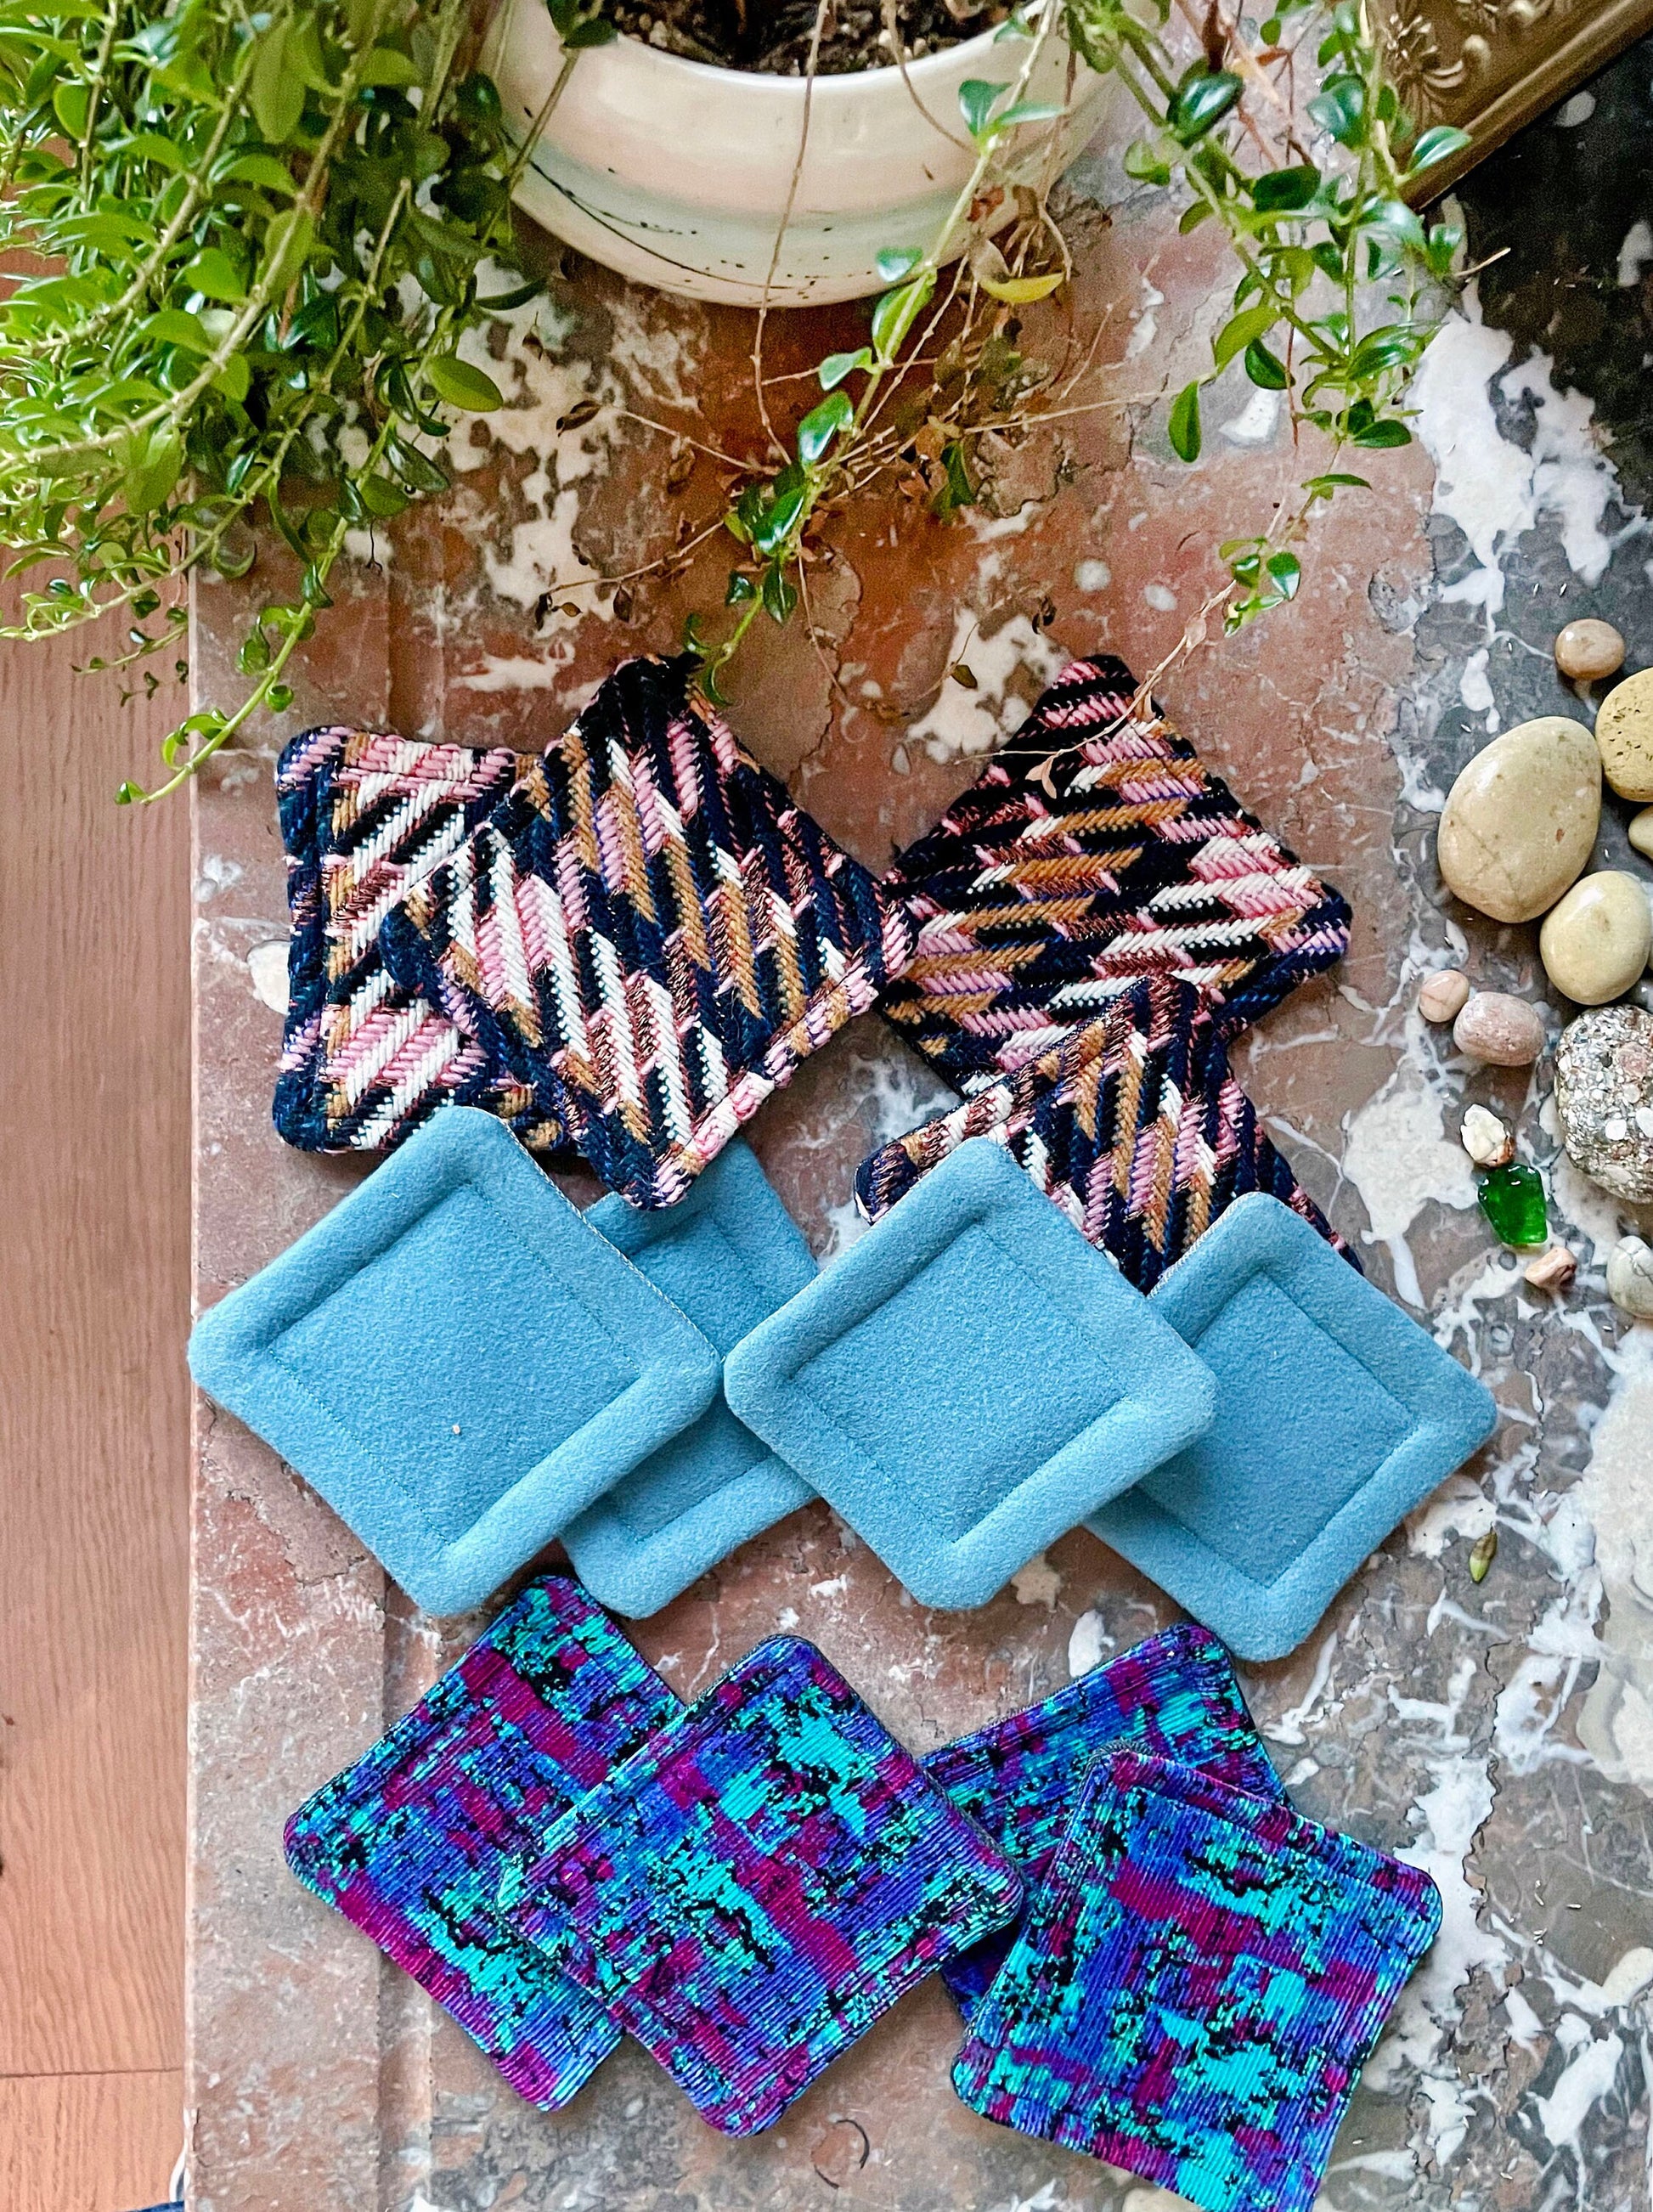 Geo Fabric Coasters - Recycled Boiled Wool and Denim